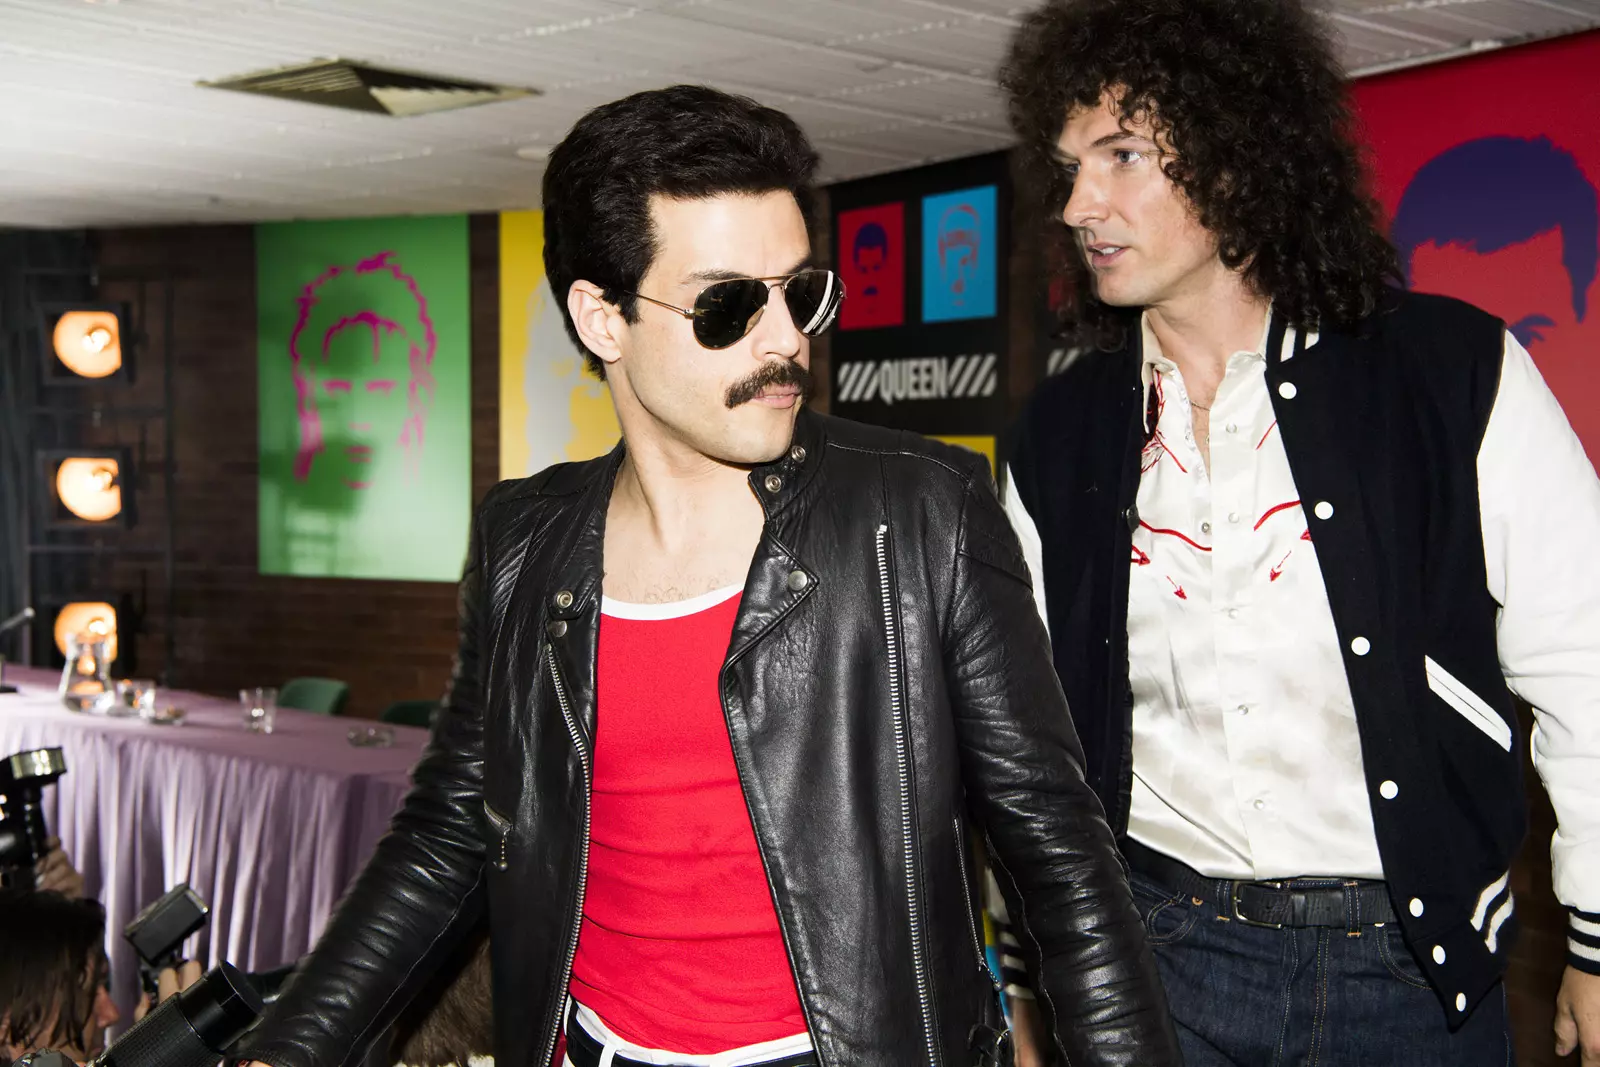 Pictures From Queen 'Bohemian Rhapsody' Film Emerge